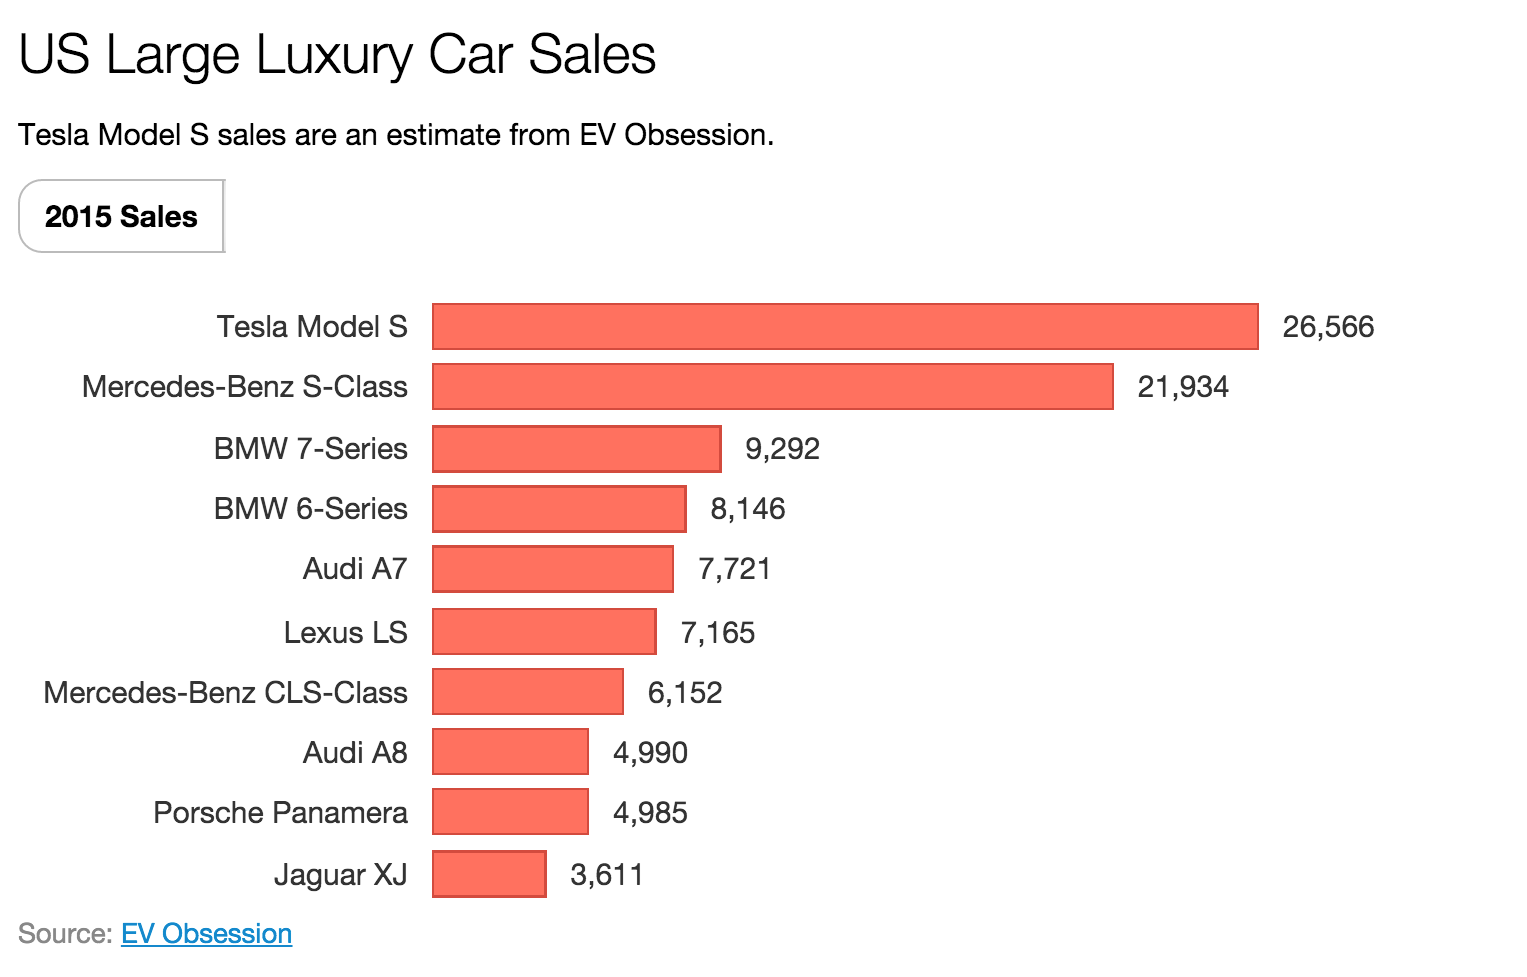 Tesla's Model S was the best-selling large luxury car in the U.S. last year, according to this estimate by EV Obsession...